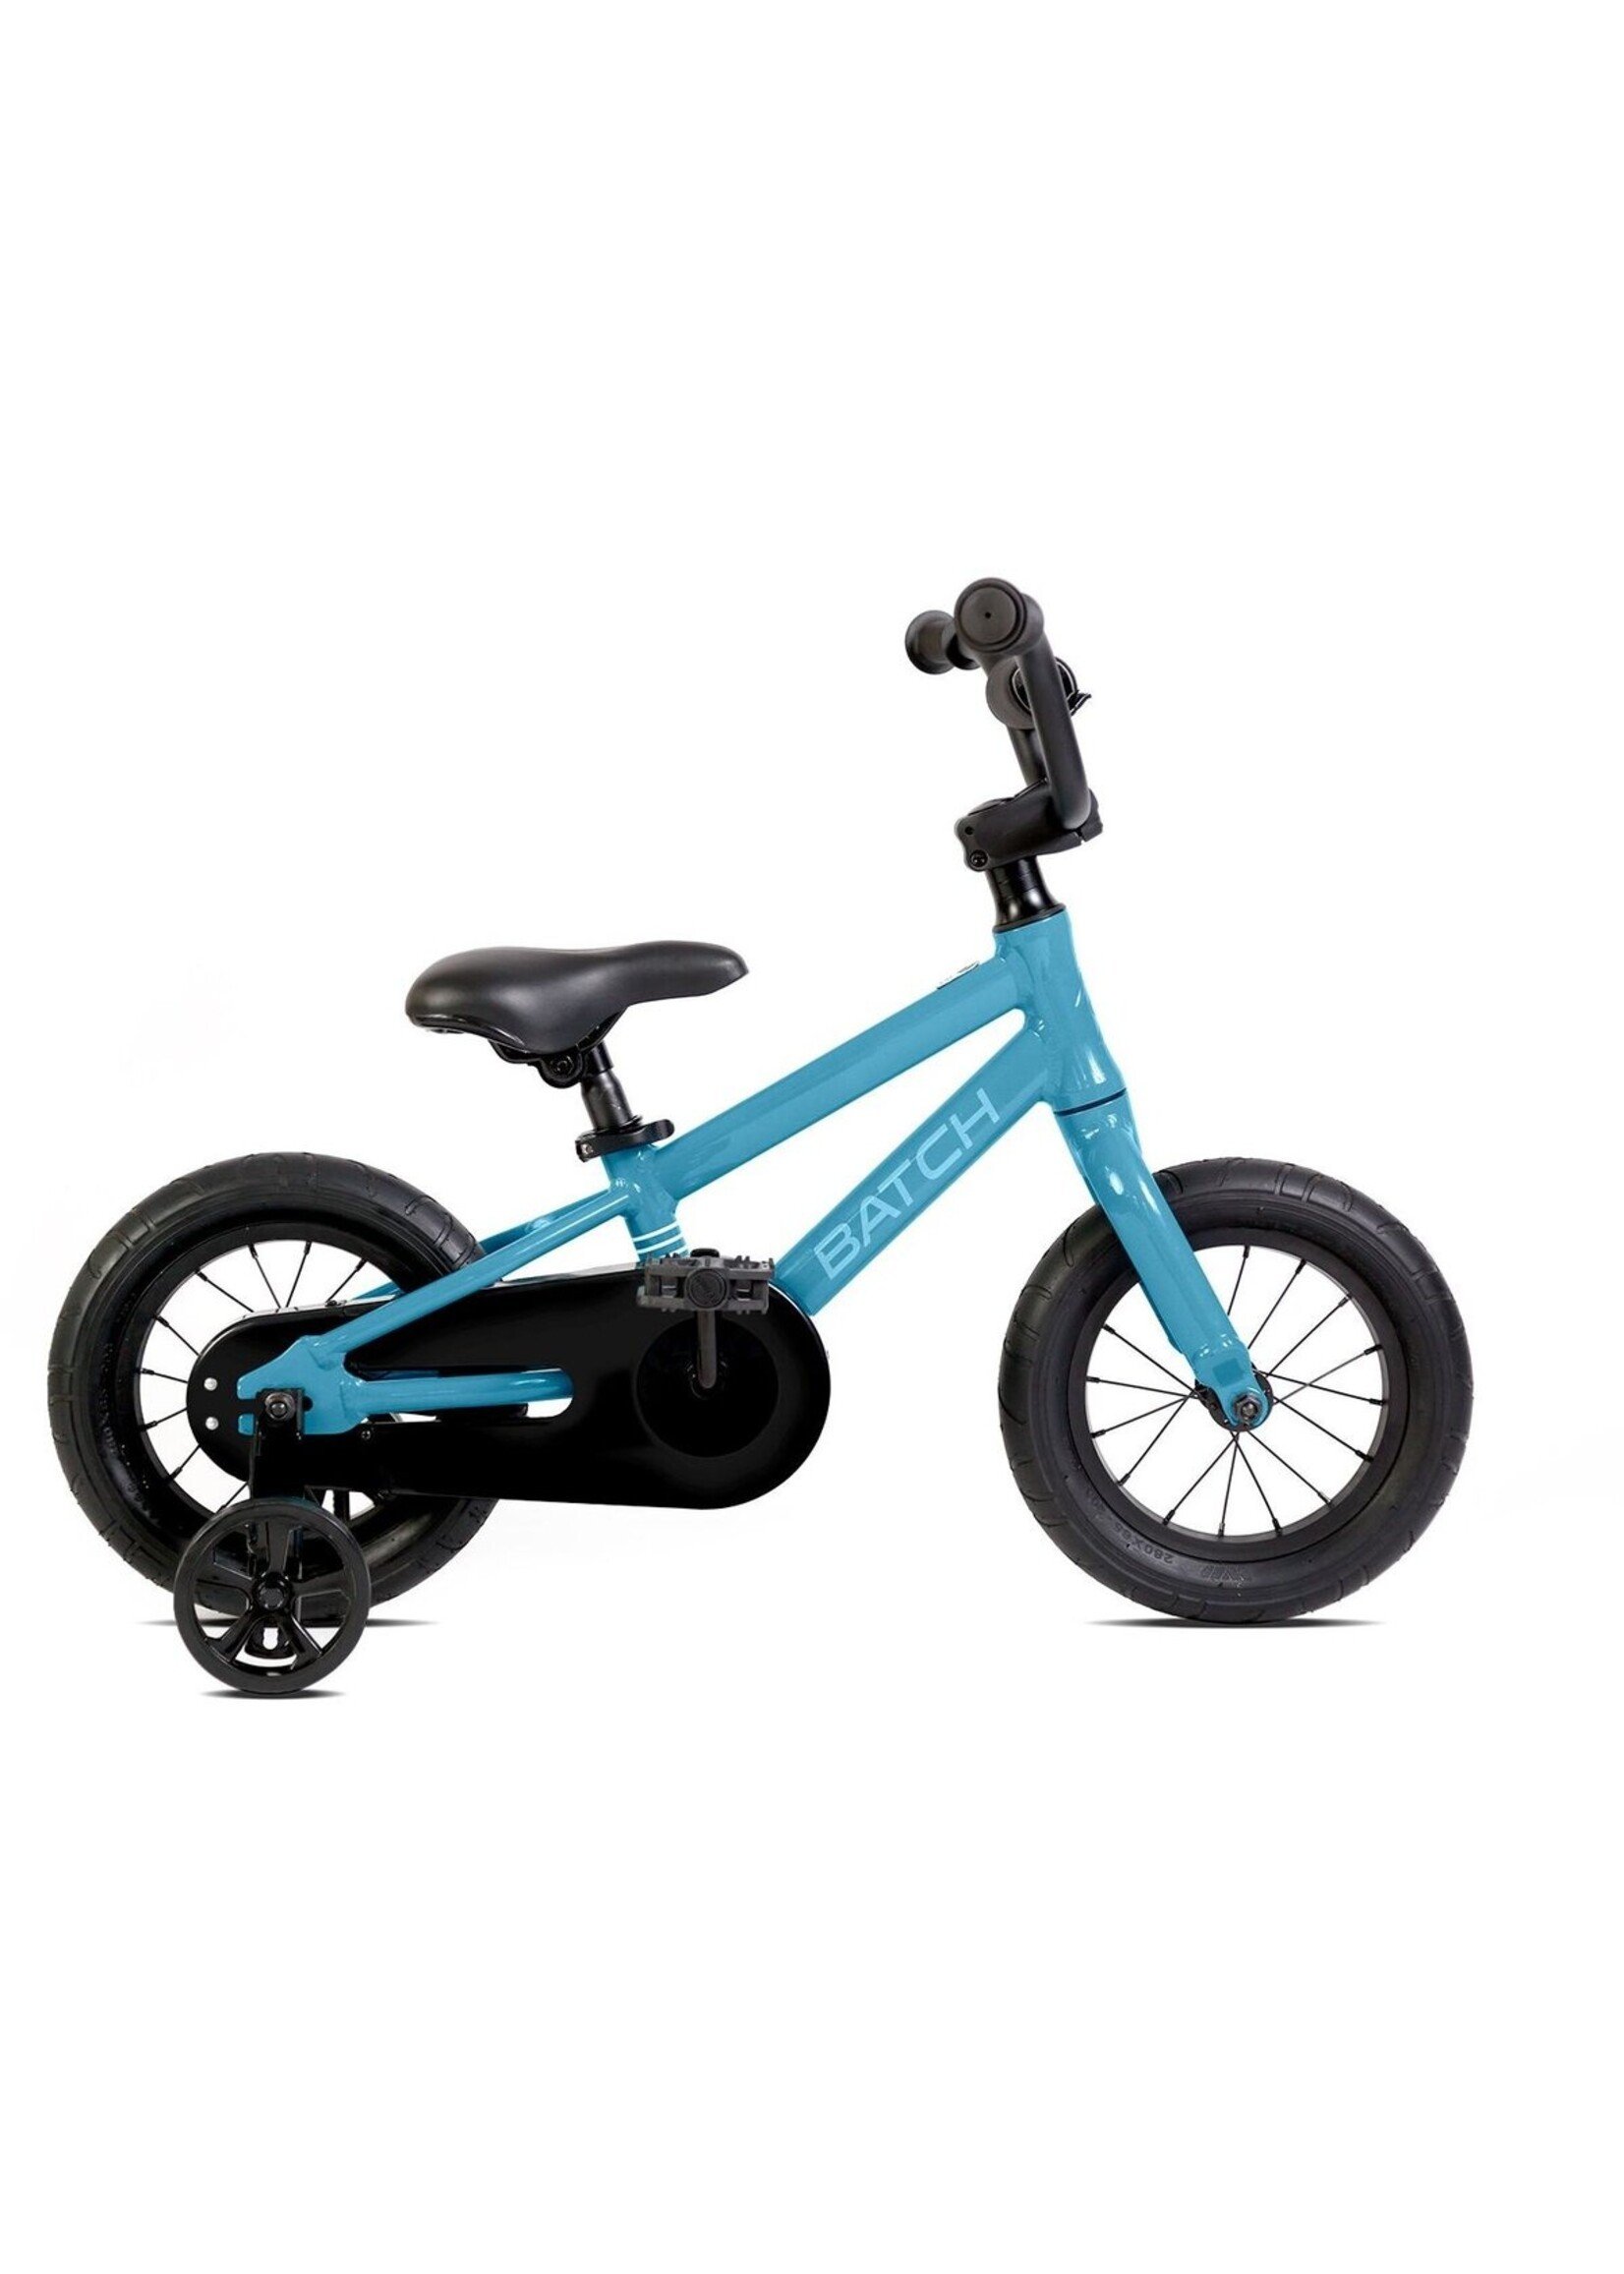 Batch THE KID'S 12-INCH BICYCLE